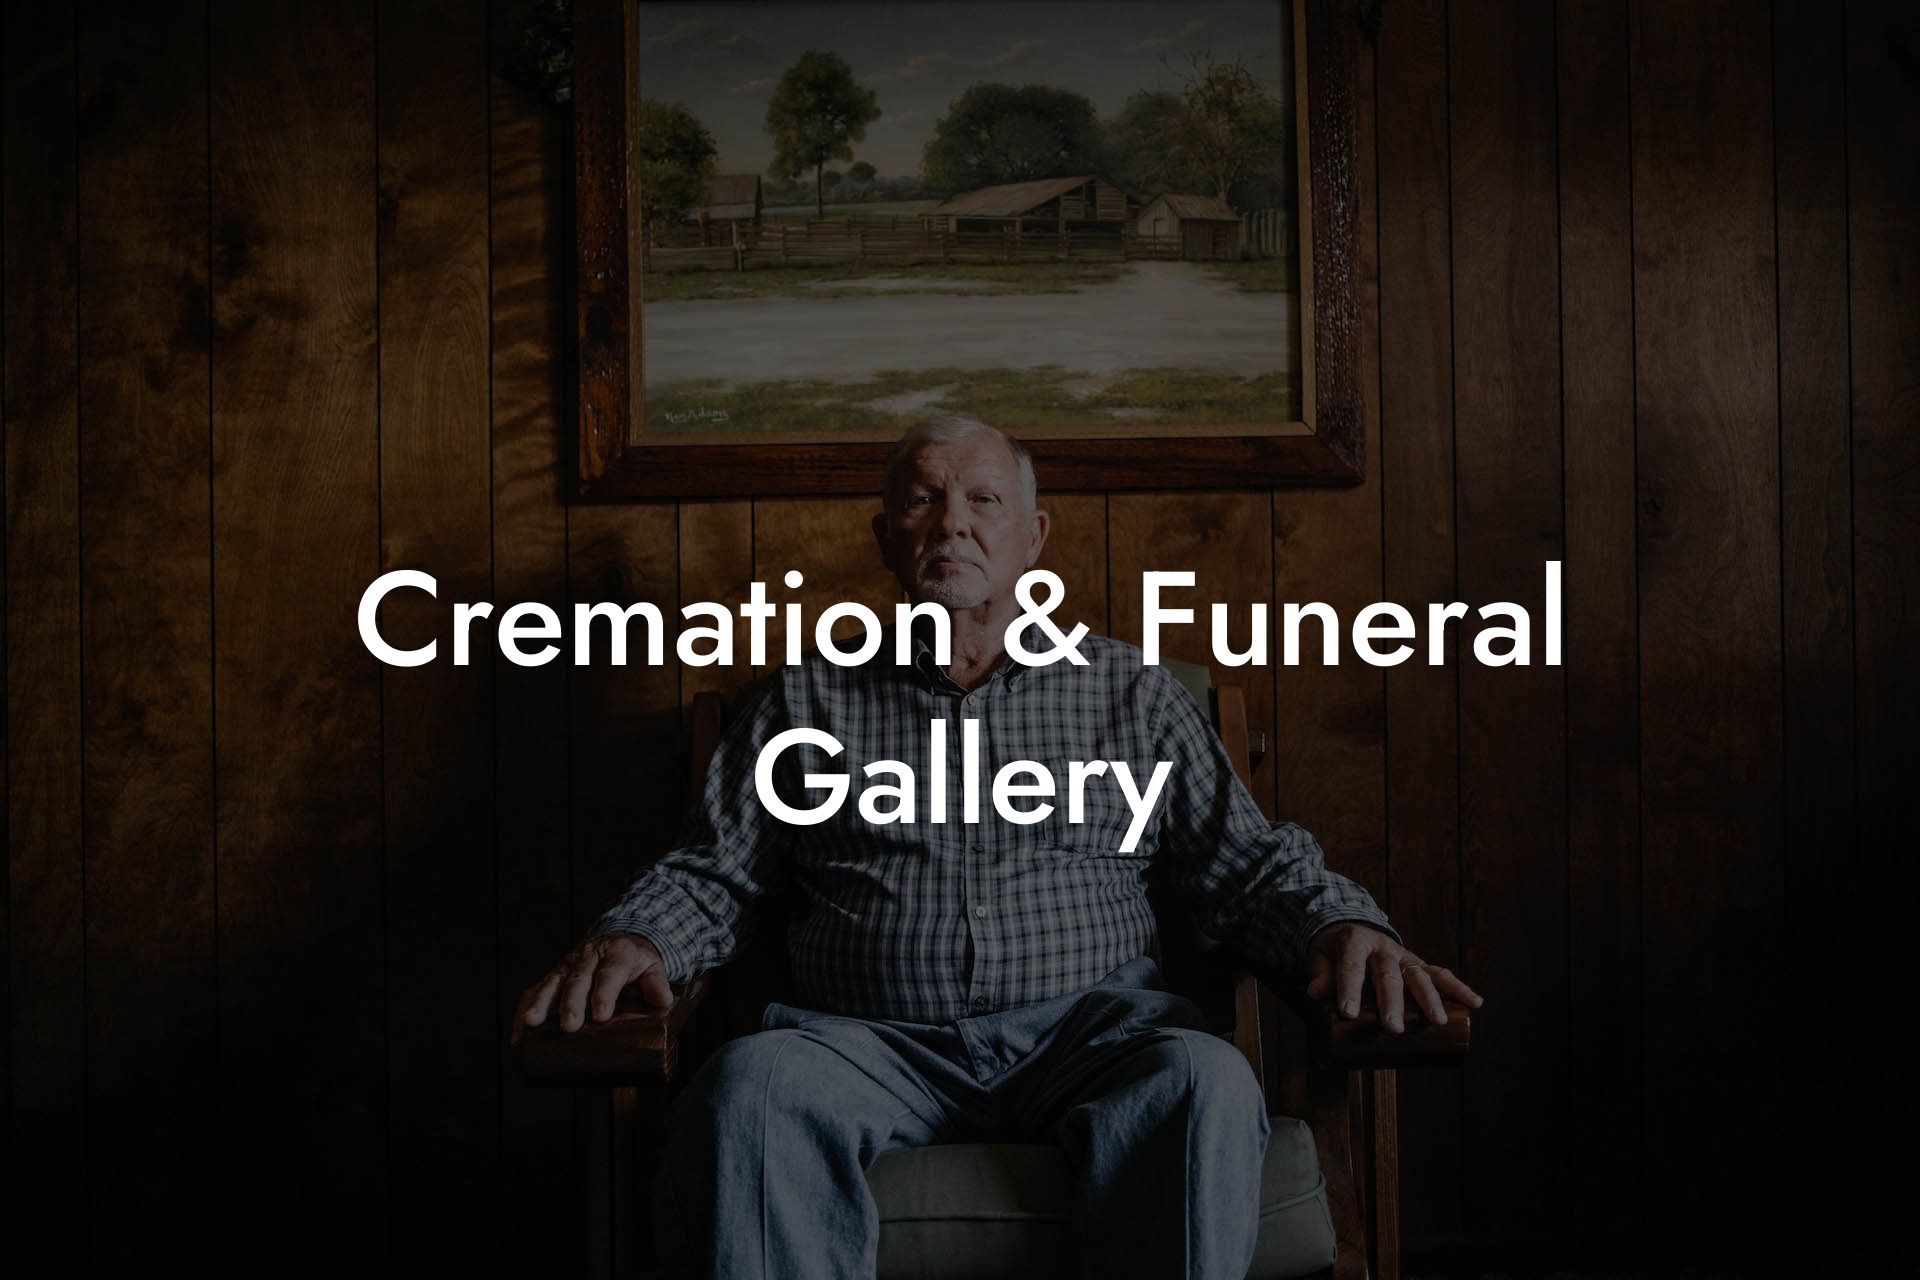 Cremation & Funeral Gallery